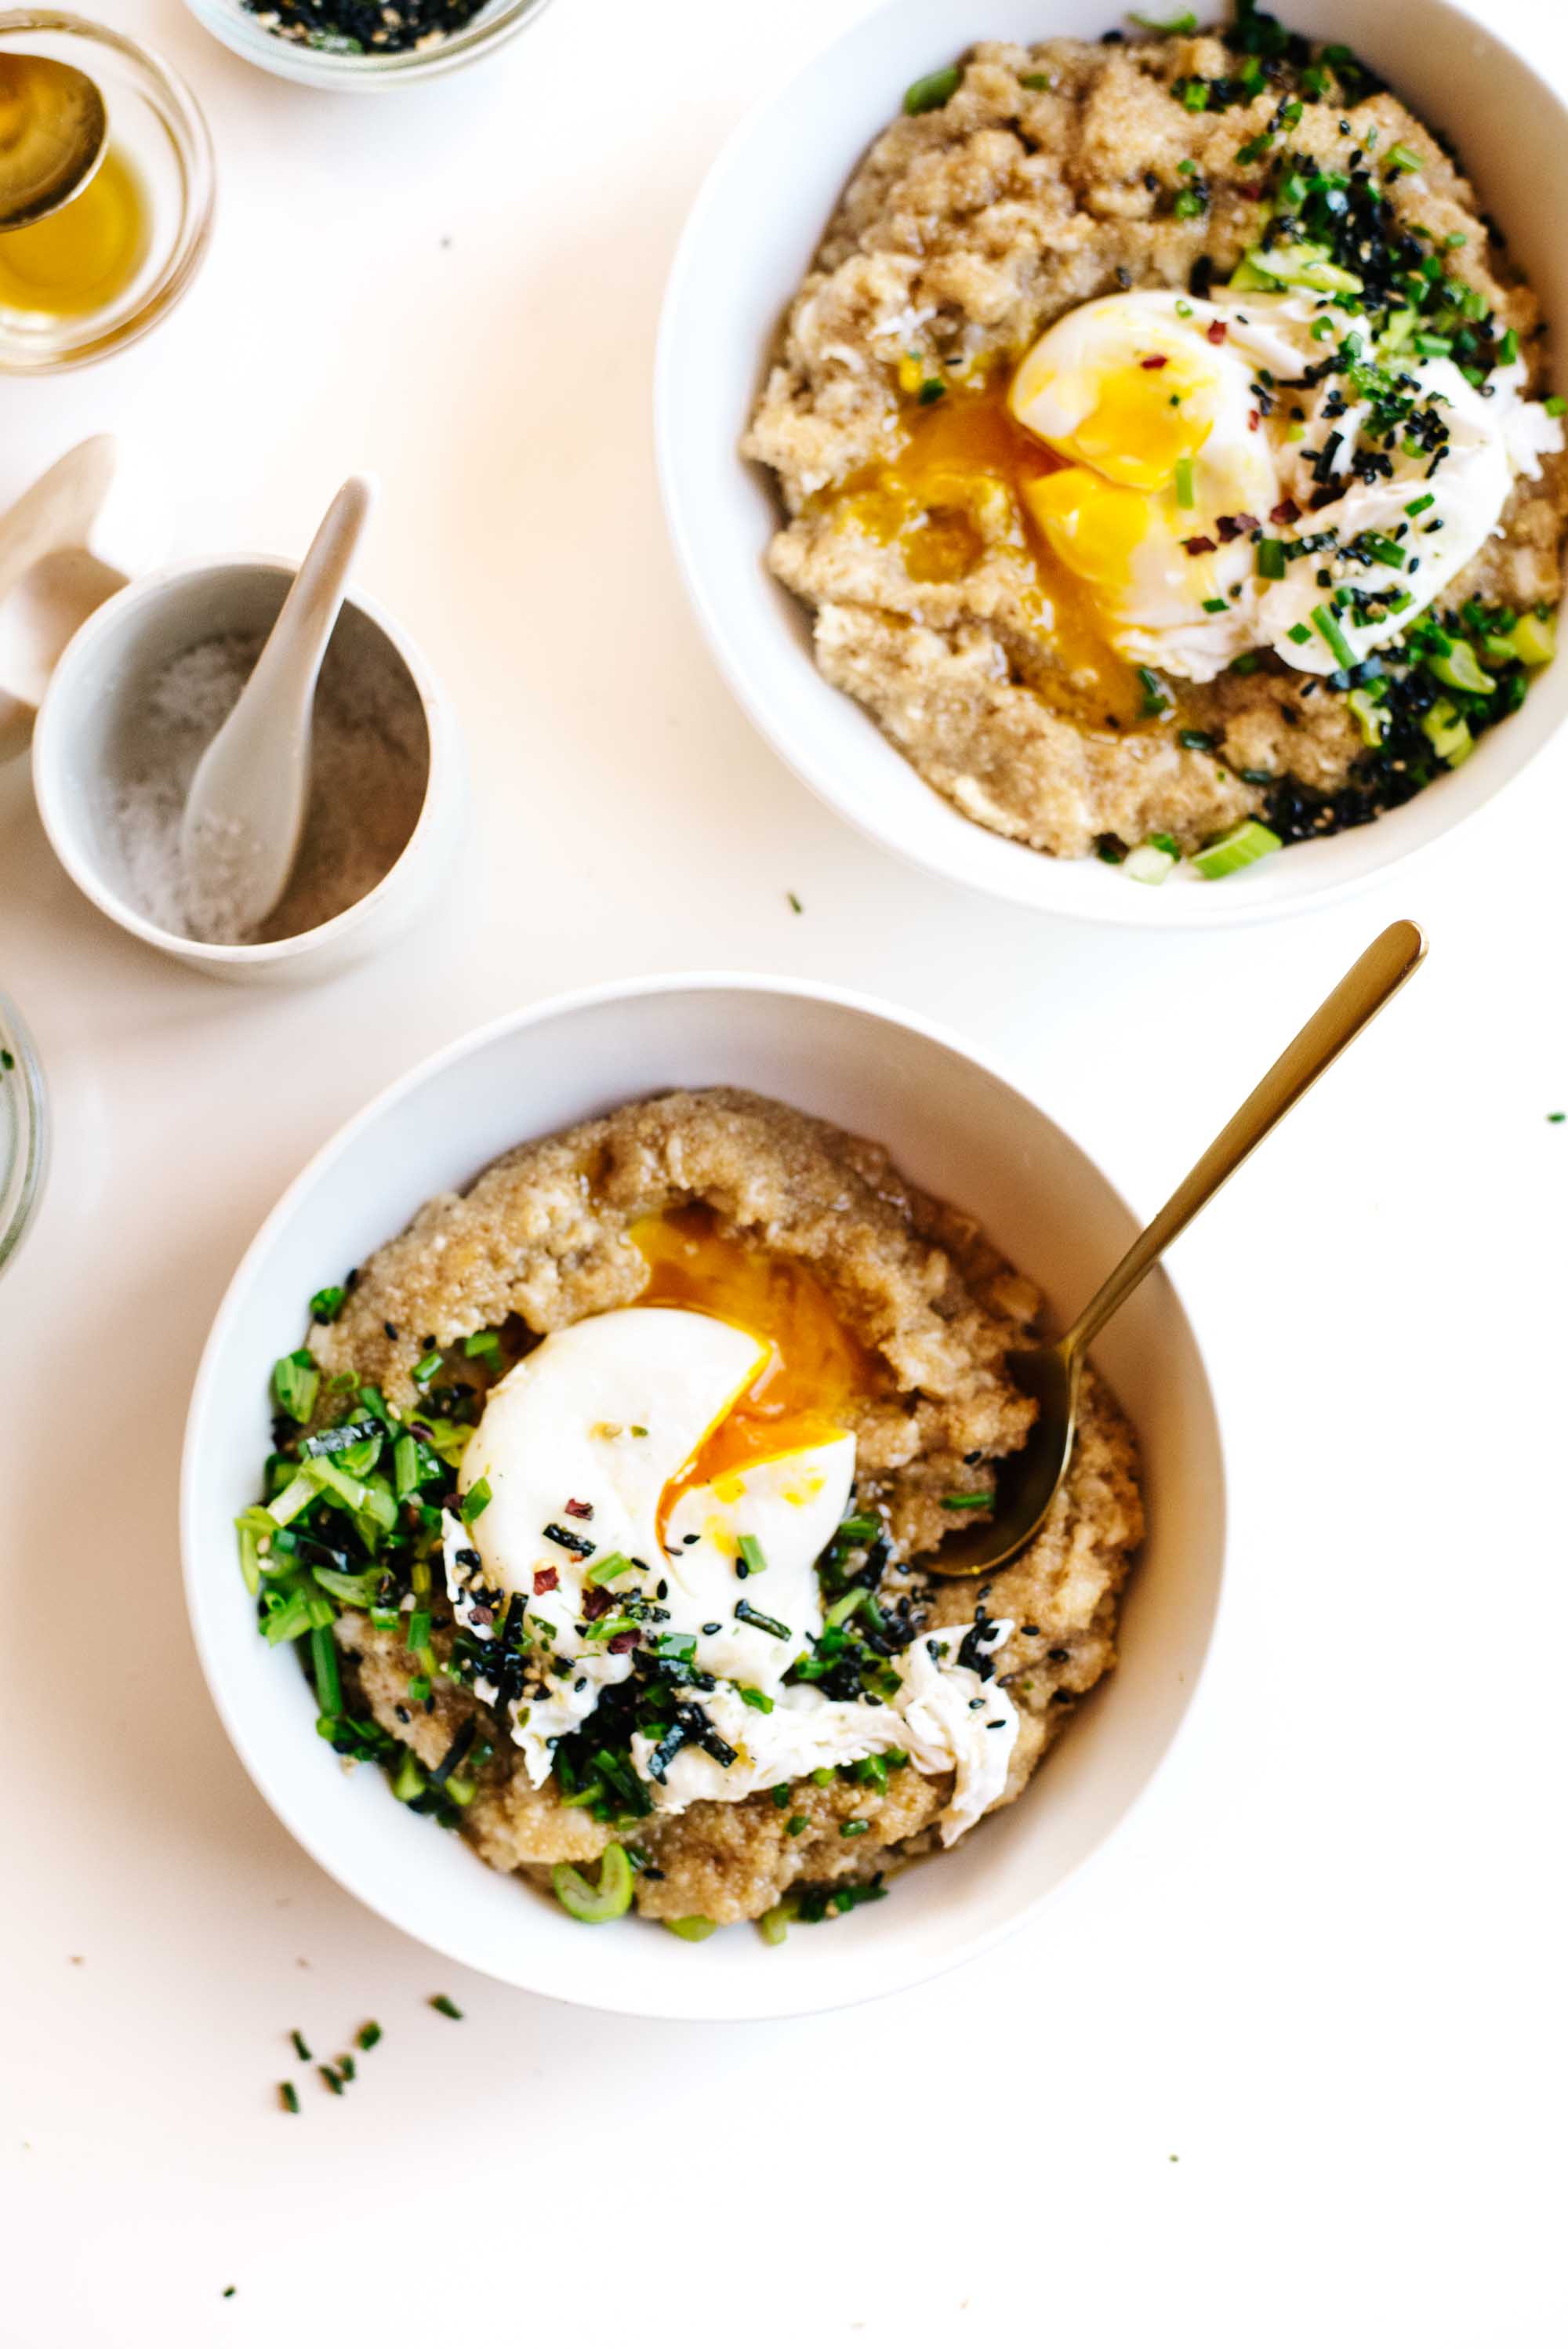 Miso Oats with Scallions + Sesame Oil from More With Less